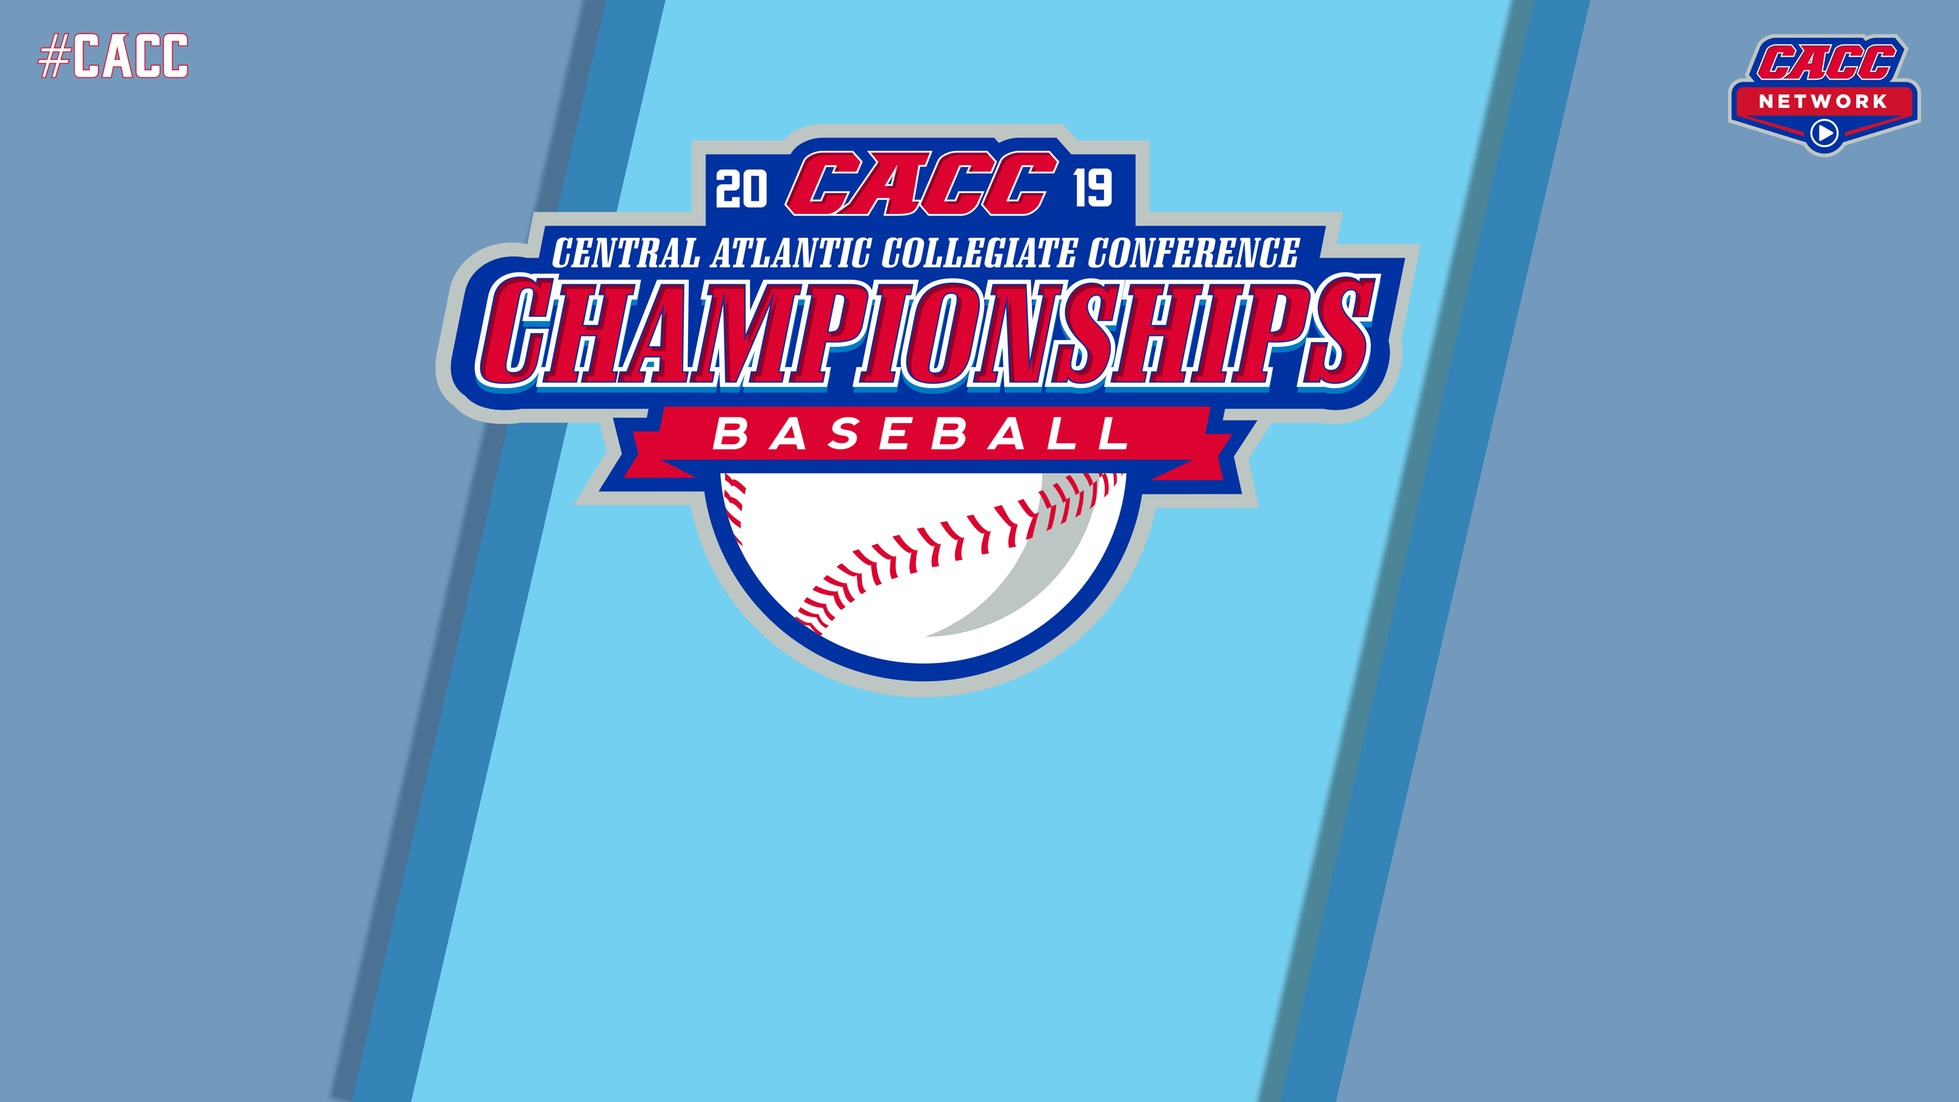 CACC NETWORK TO WEBSTREAM ALL GAMES OF THIS WEEK'S 2019 CACC BASEBALL CHAMPIONSHIP TOURNAMENT